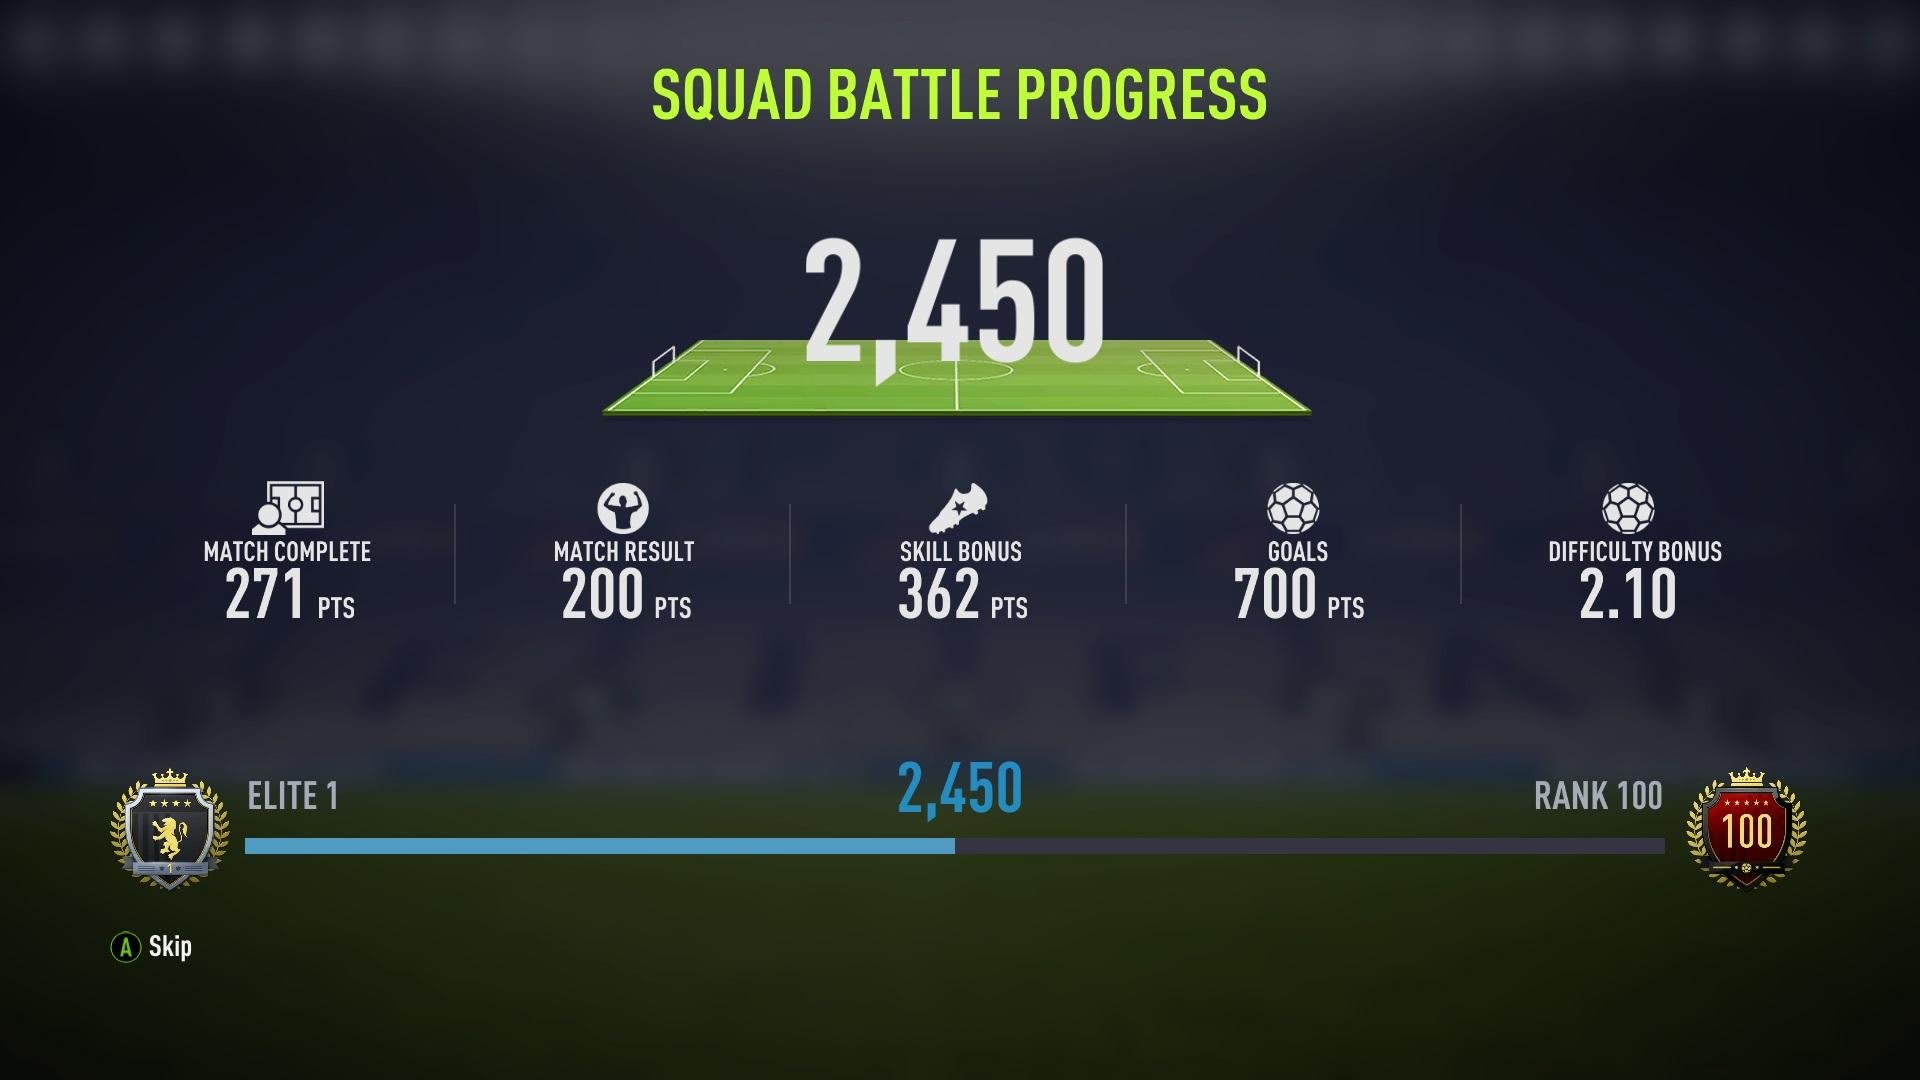 Featured Squads List of FIFA 18 Squad Battles